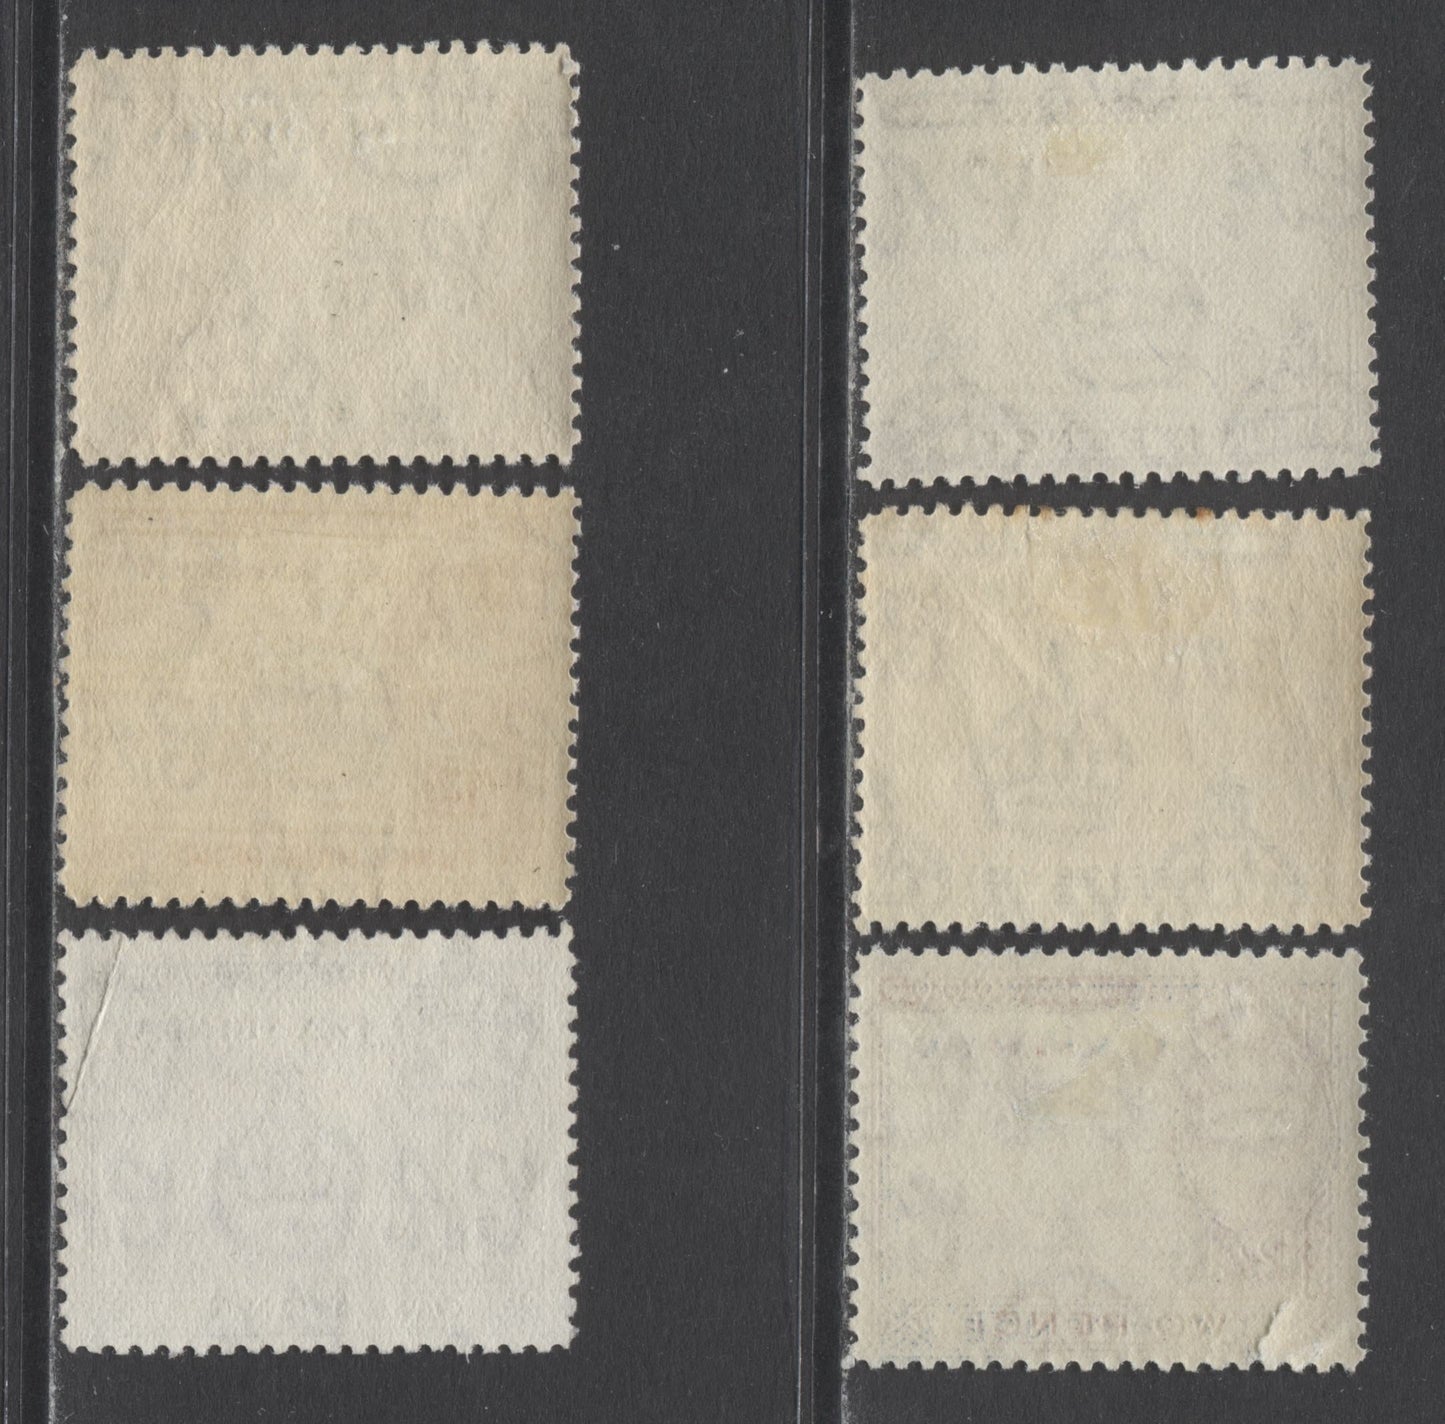 Lot 9 Gambia SC#133-136a 1938-1946 KGVI & Elephant Badge Definitives, A F/VFOG and Used Range Of Singles, 2017 Scott Cat. $10.65 USD, Click on Listing to See ALL Pictures